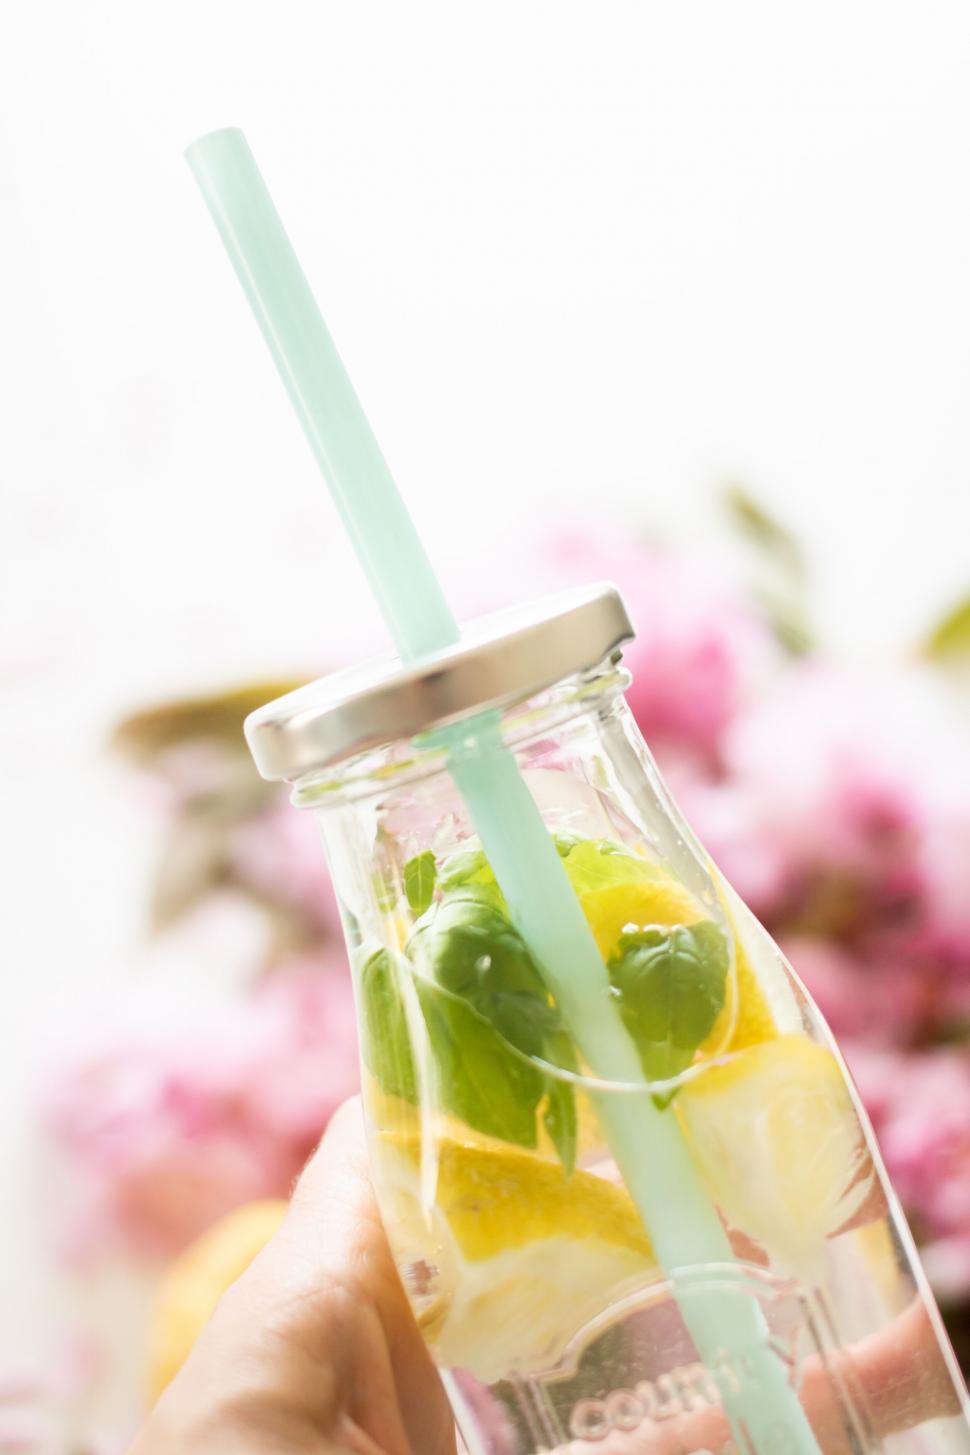 Free Image of Hand holding jar with citrus-infused water 